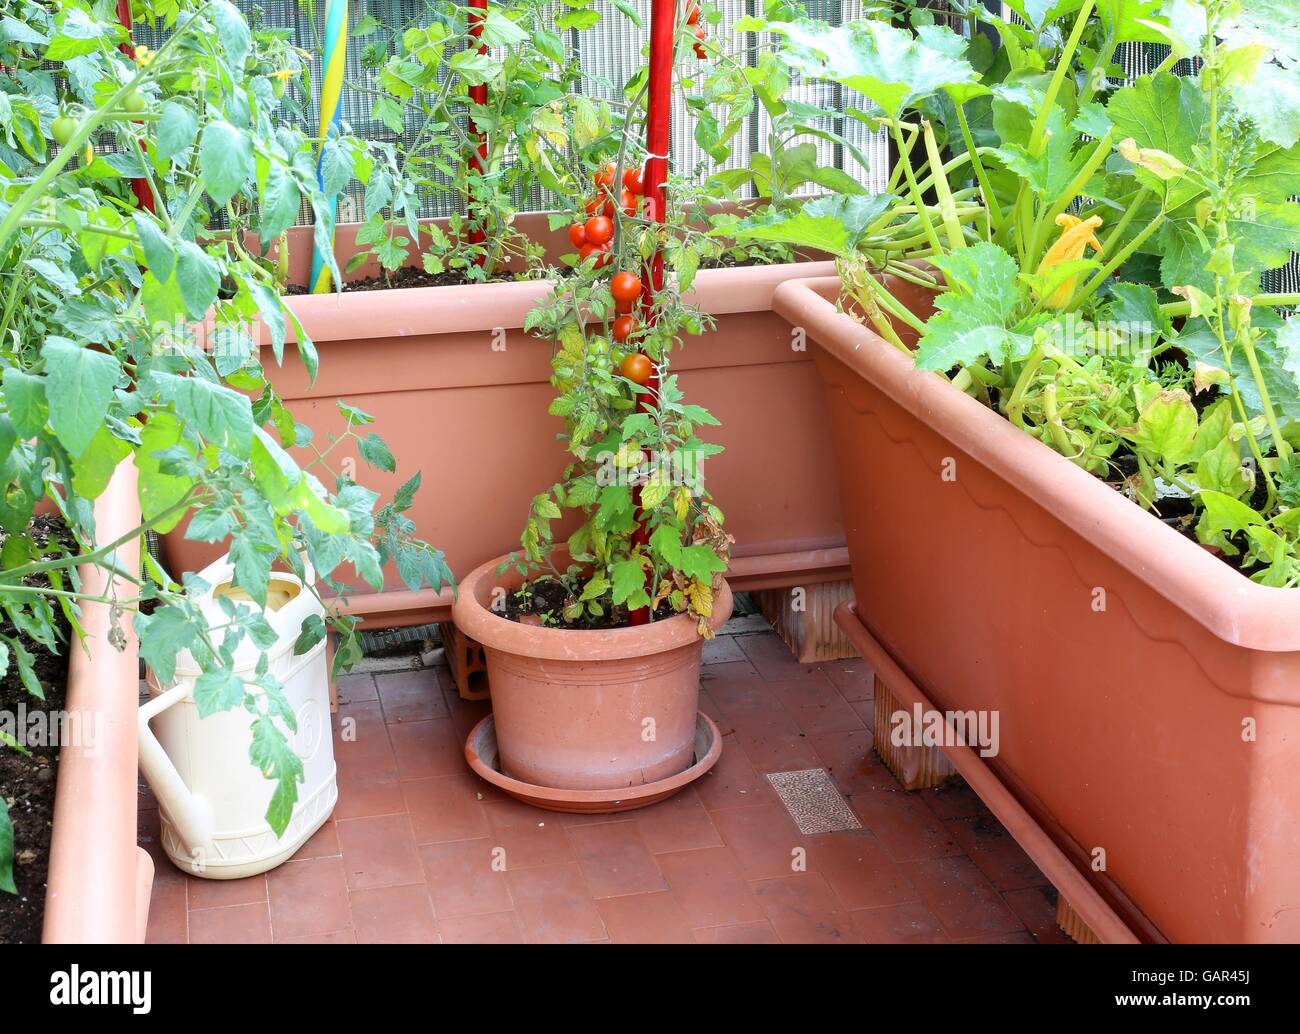 potted plant with red vine tomatoes in a small urban garden on the terrace apartment Stock Photo